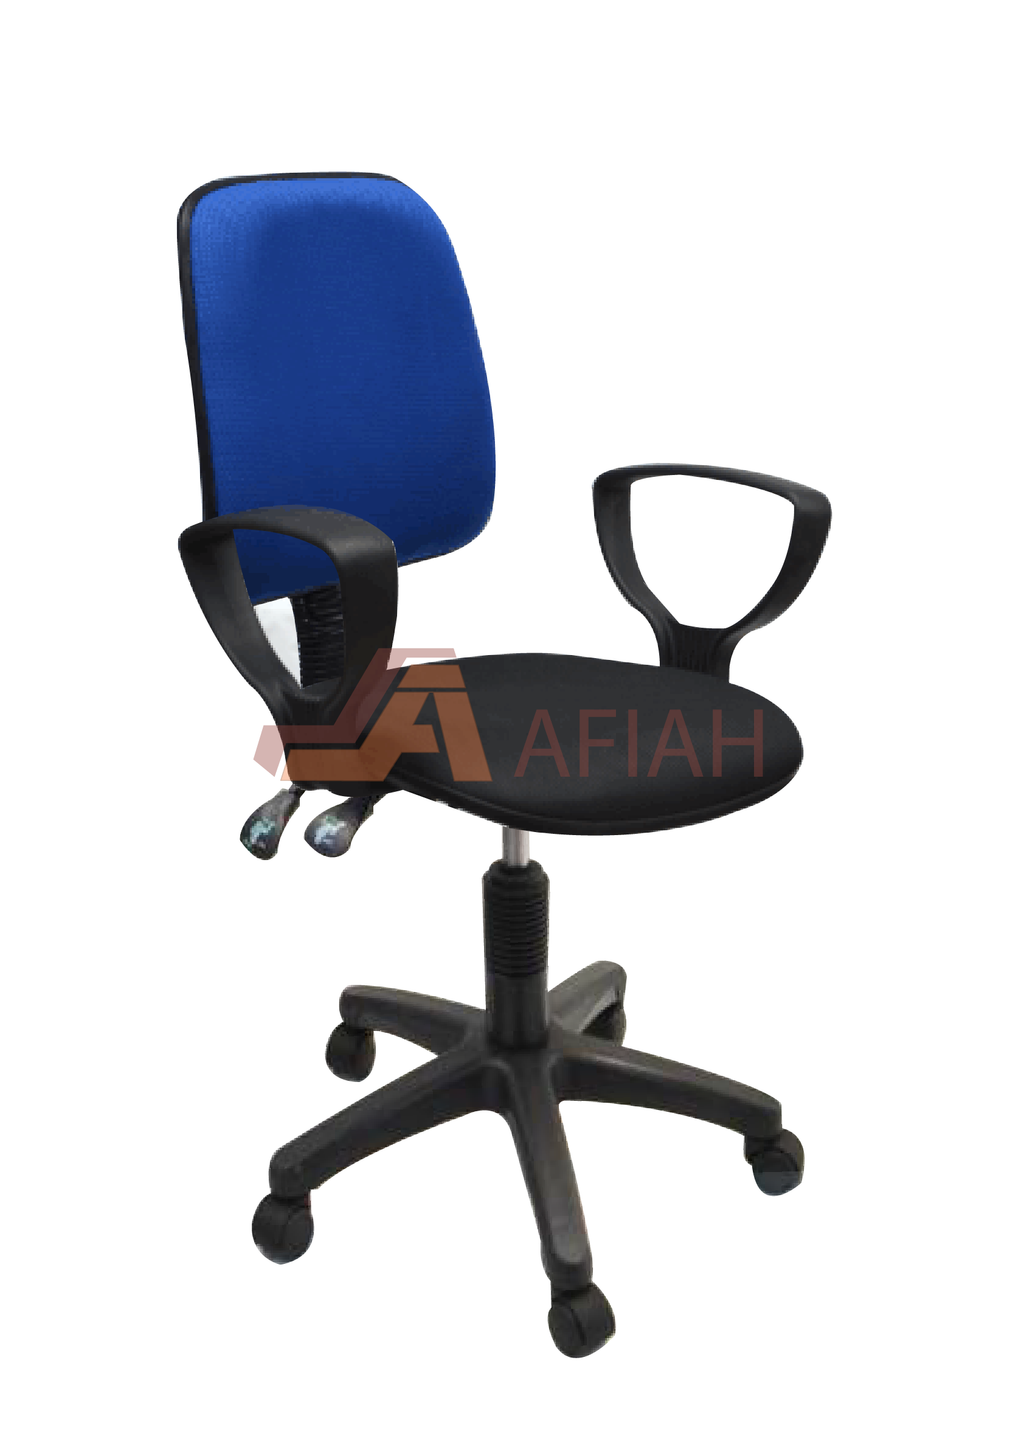 Clerical Chair - Afia Manufacturing Sdn Bhd, Afiah Trading Company